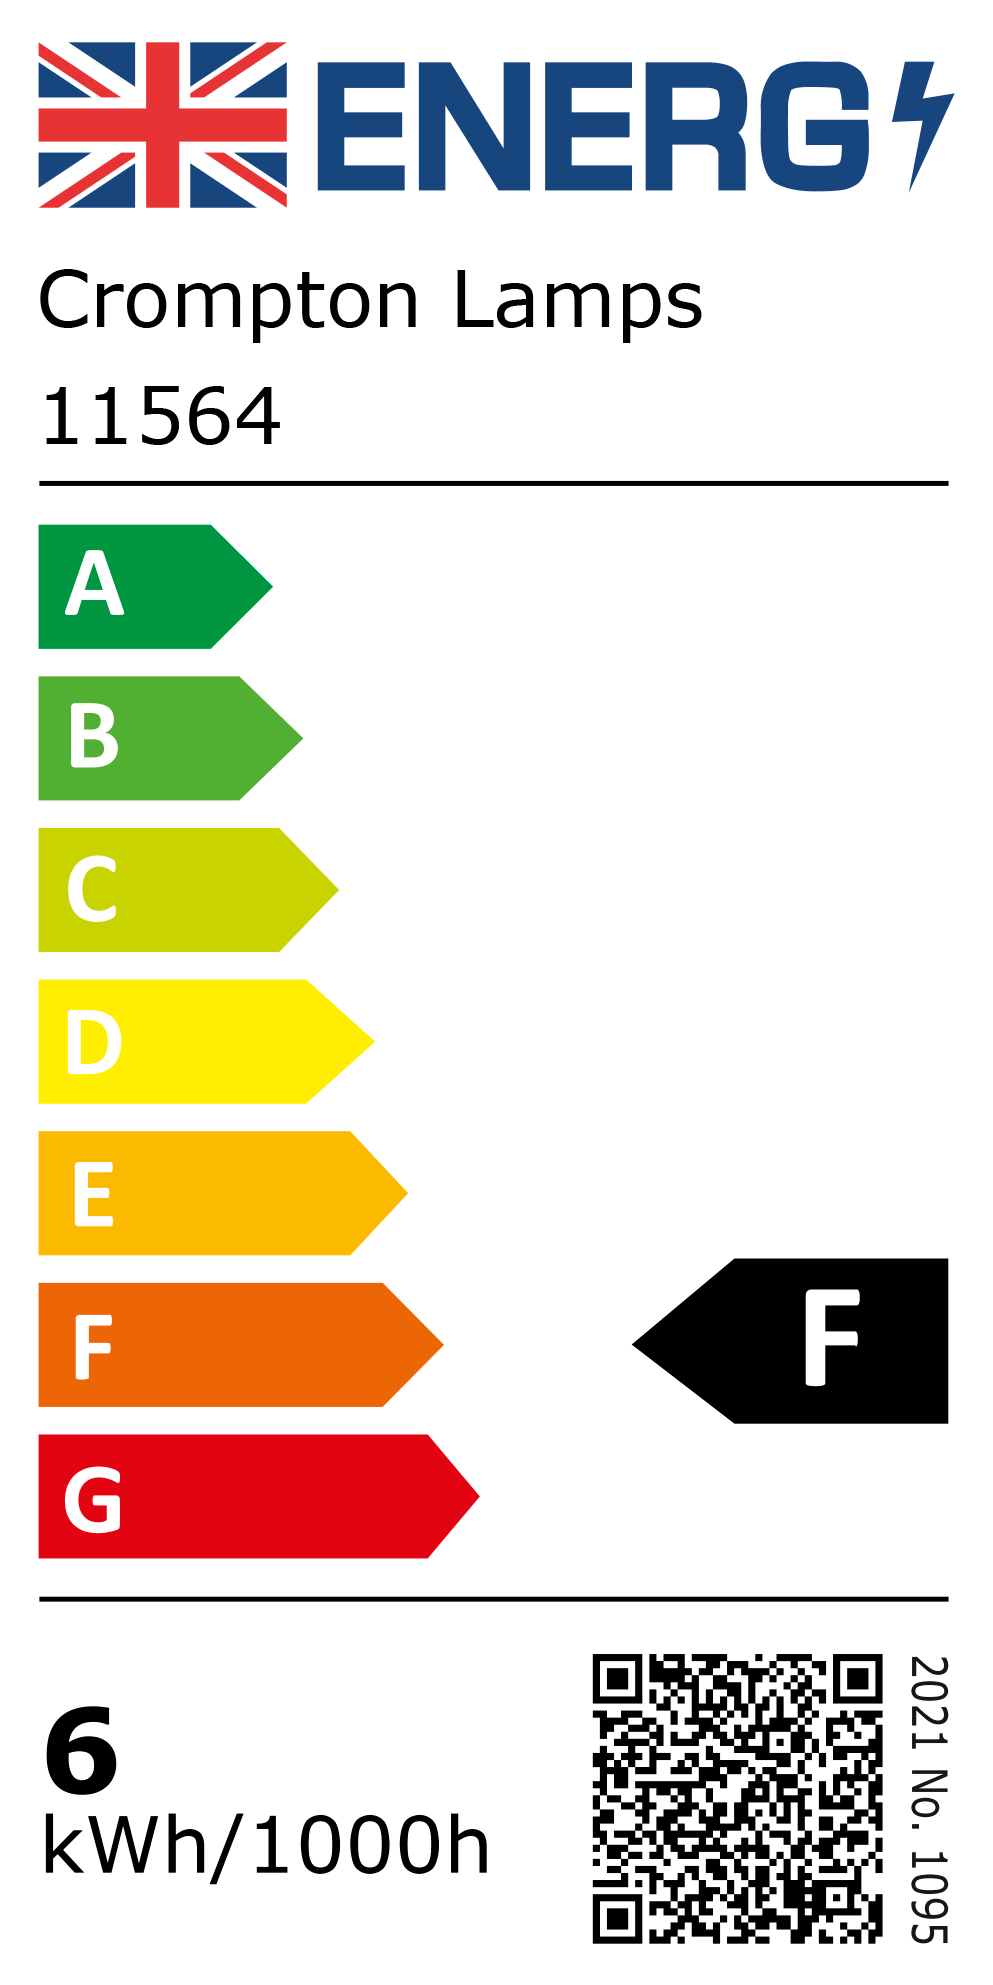 New 2021 Energy Rating Label: Stock Code 11564